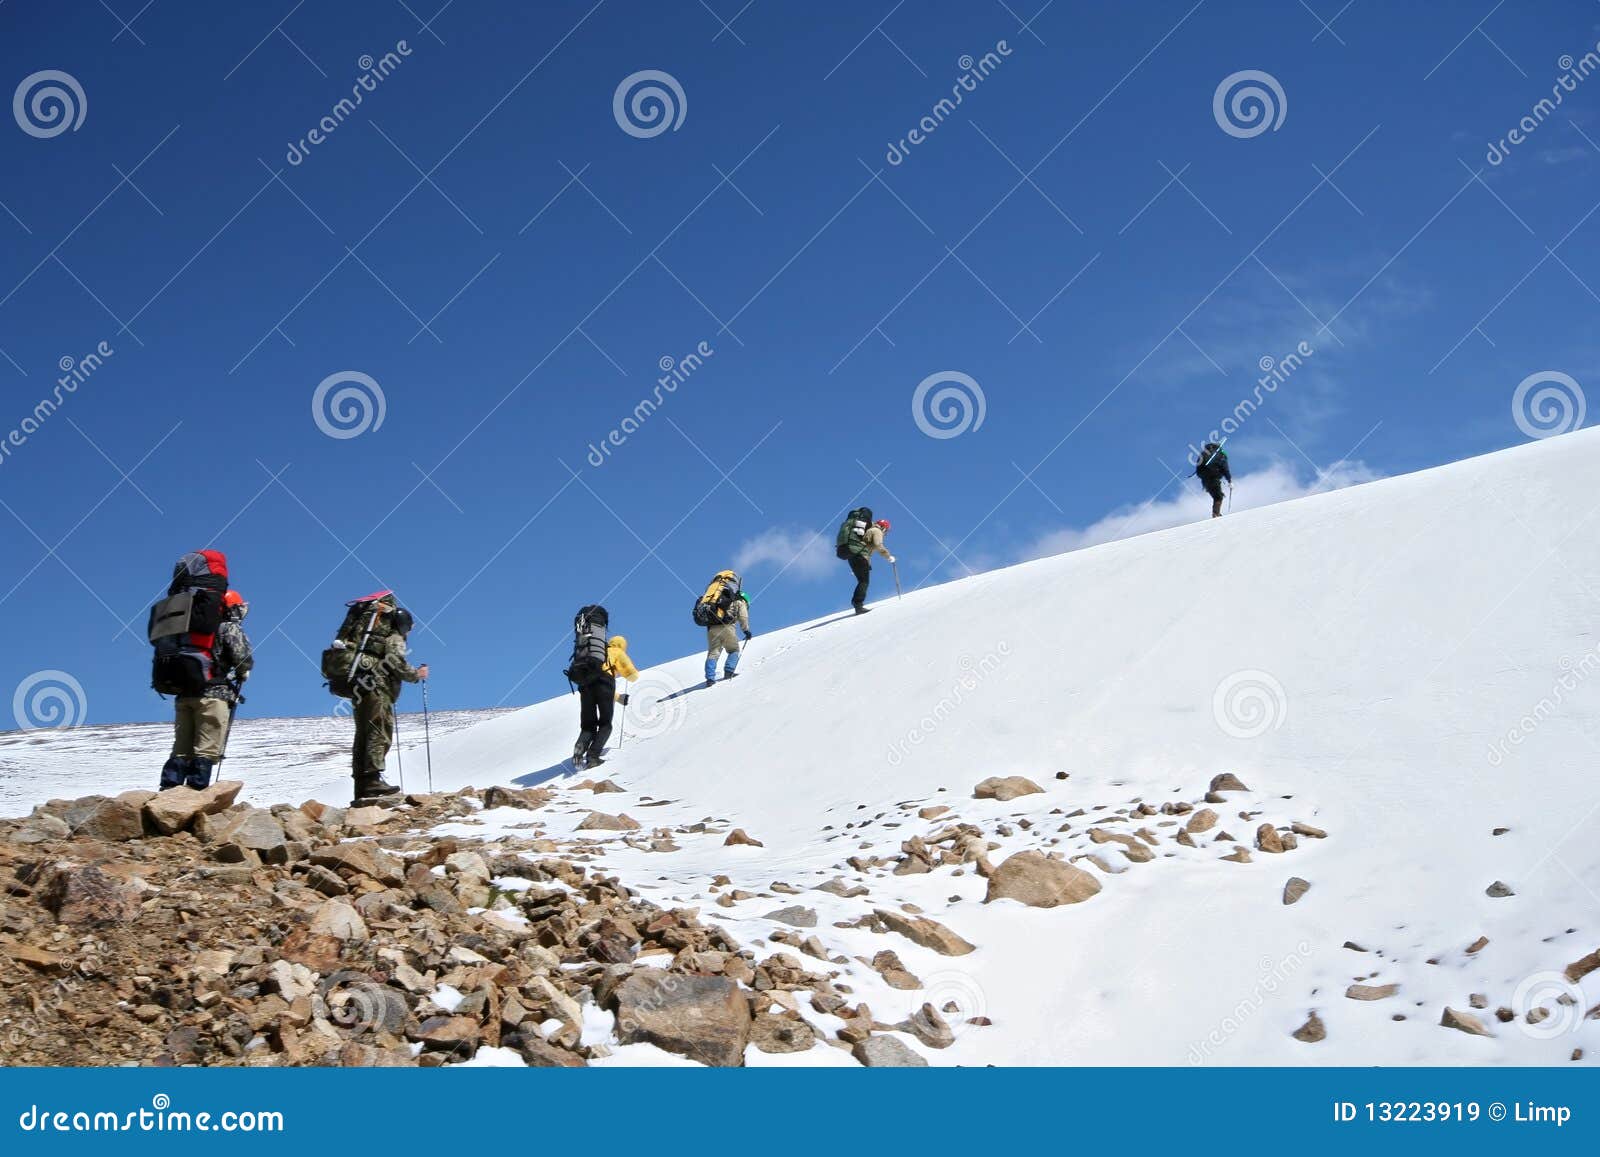 alpinists at the climbing in caucasus mountains